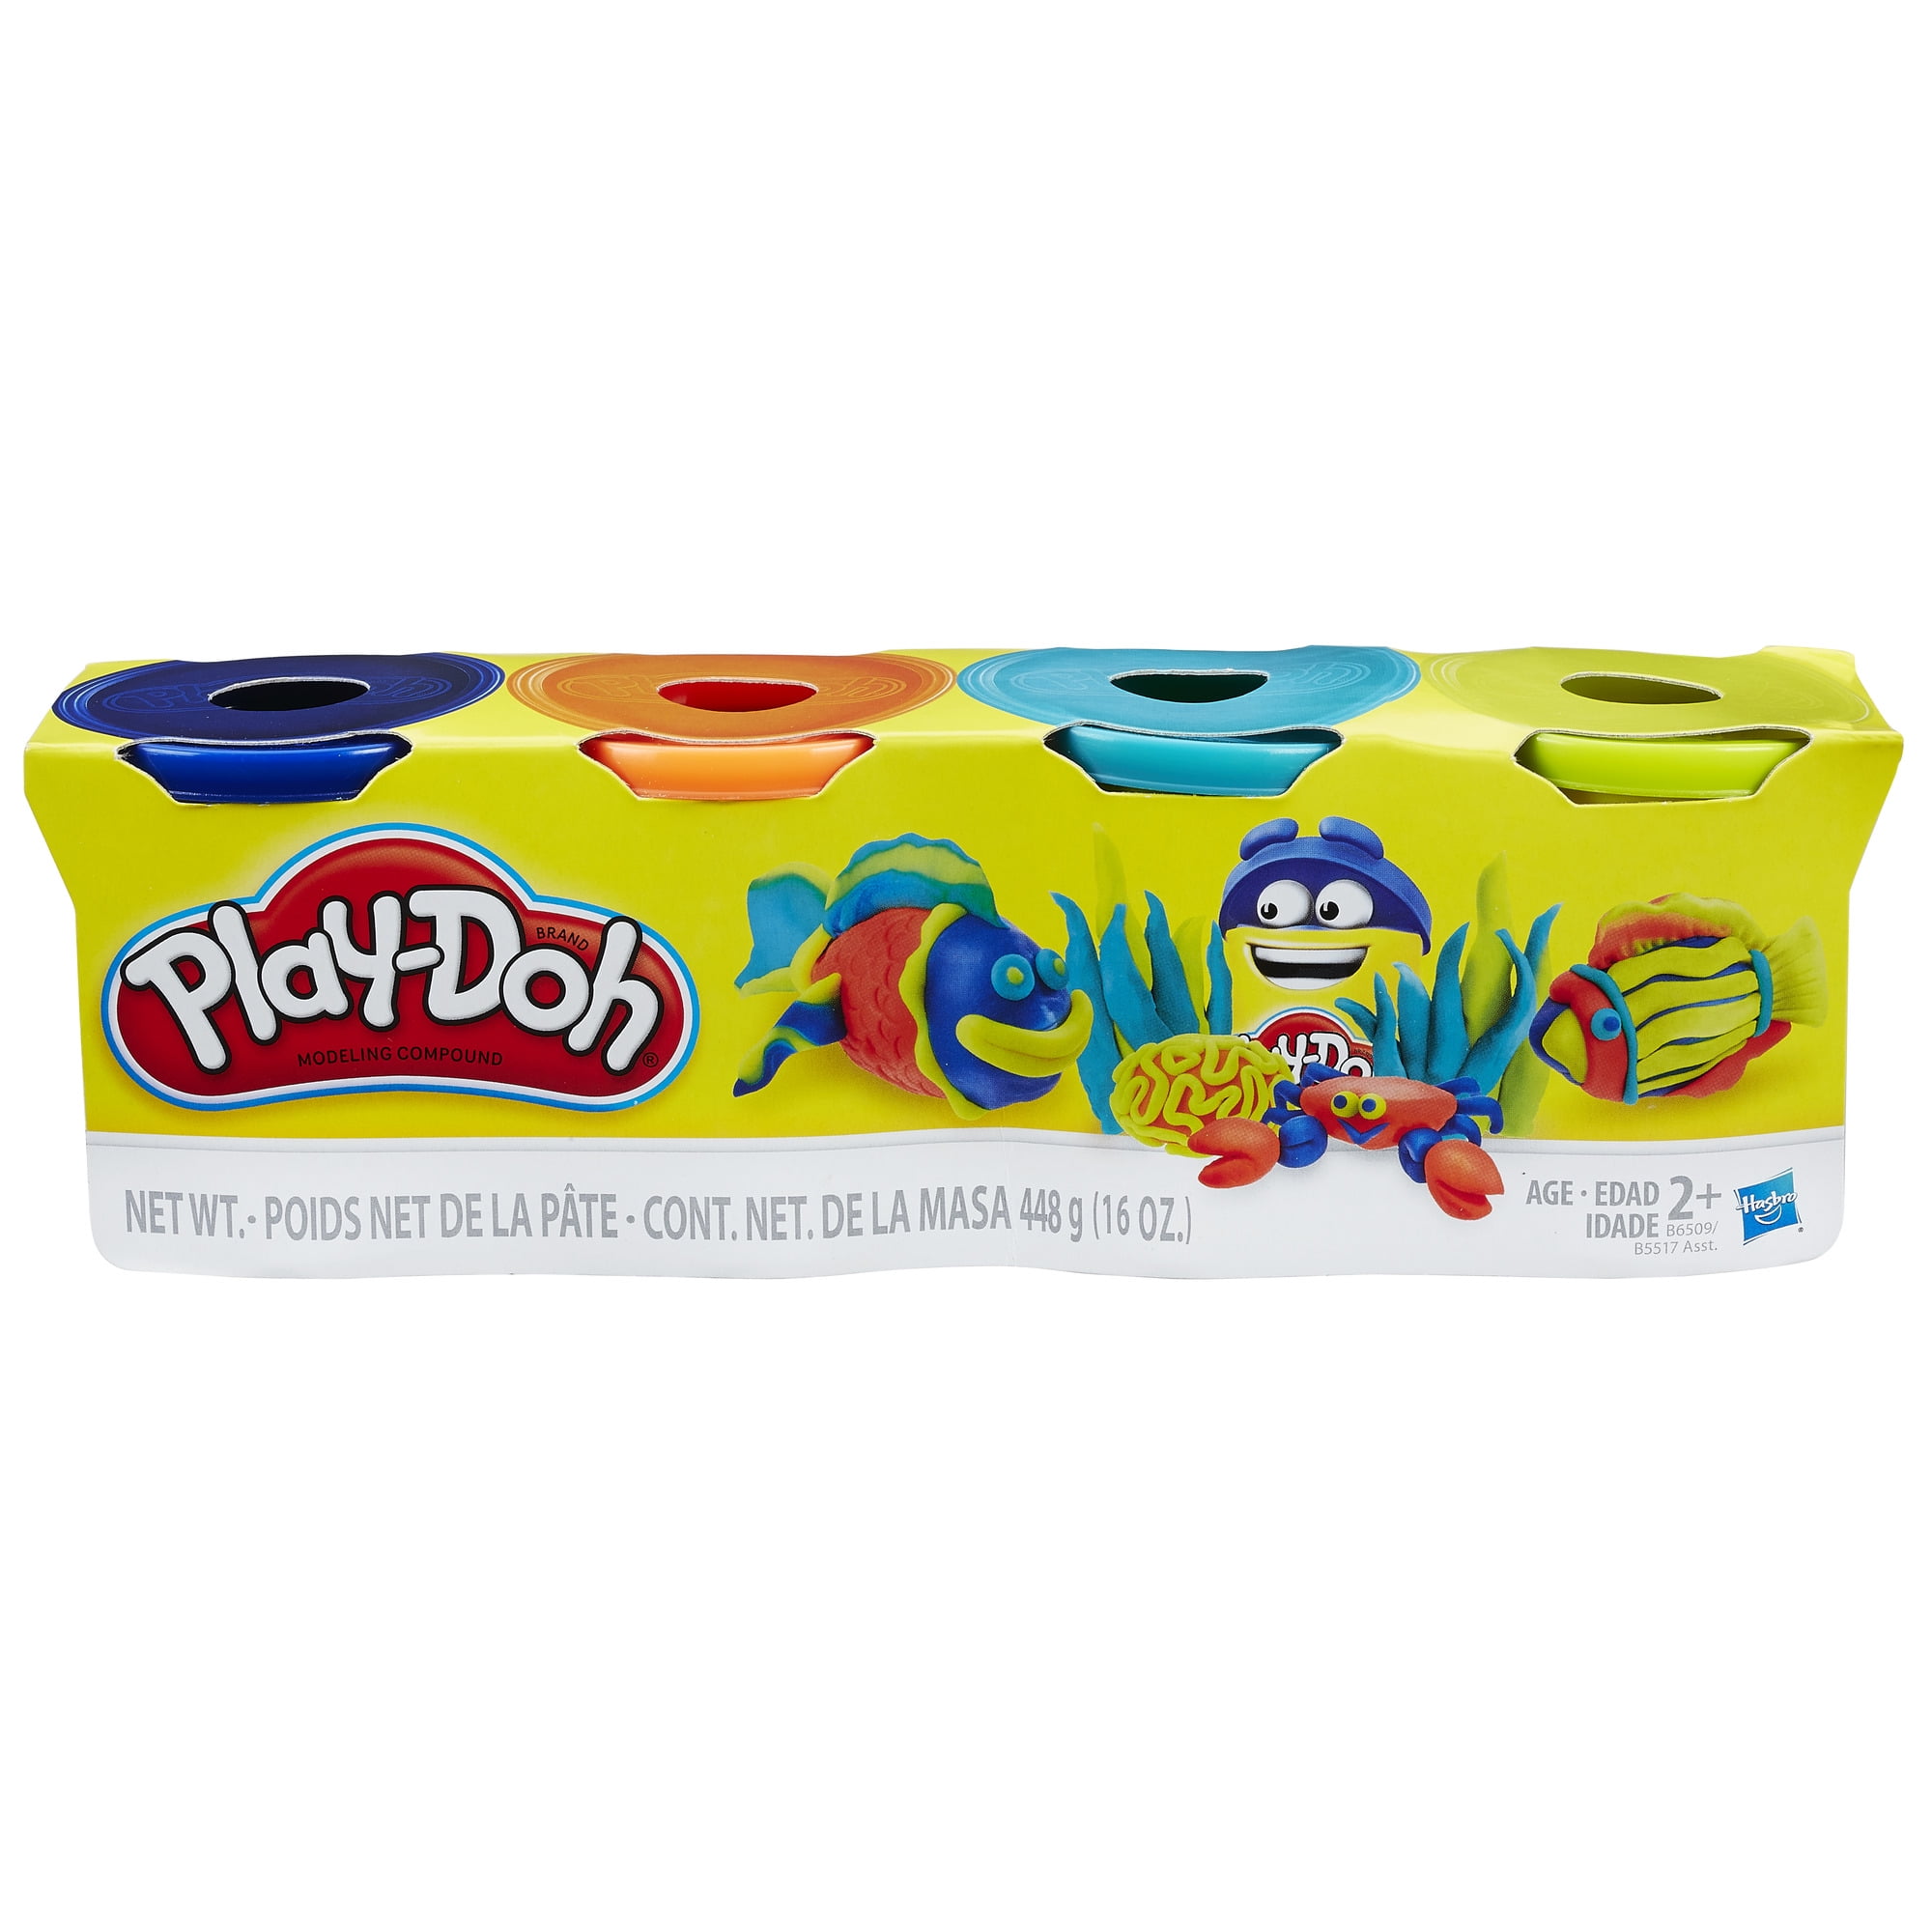 Play-Doh Basic Fun Factory Shape Making Machine With 2 Non-Toxic Play-Doh Colors 